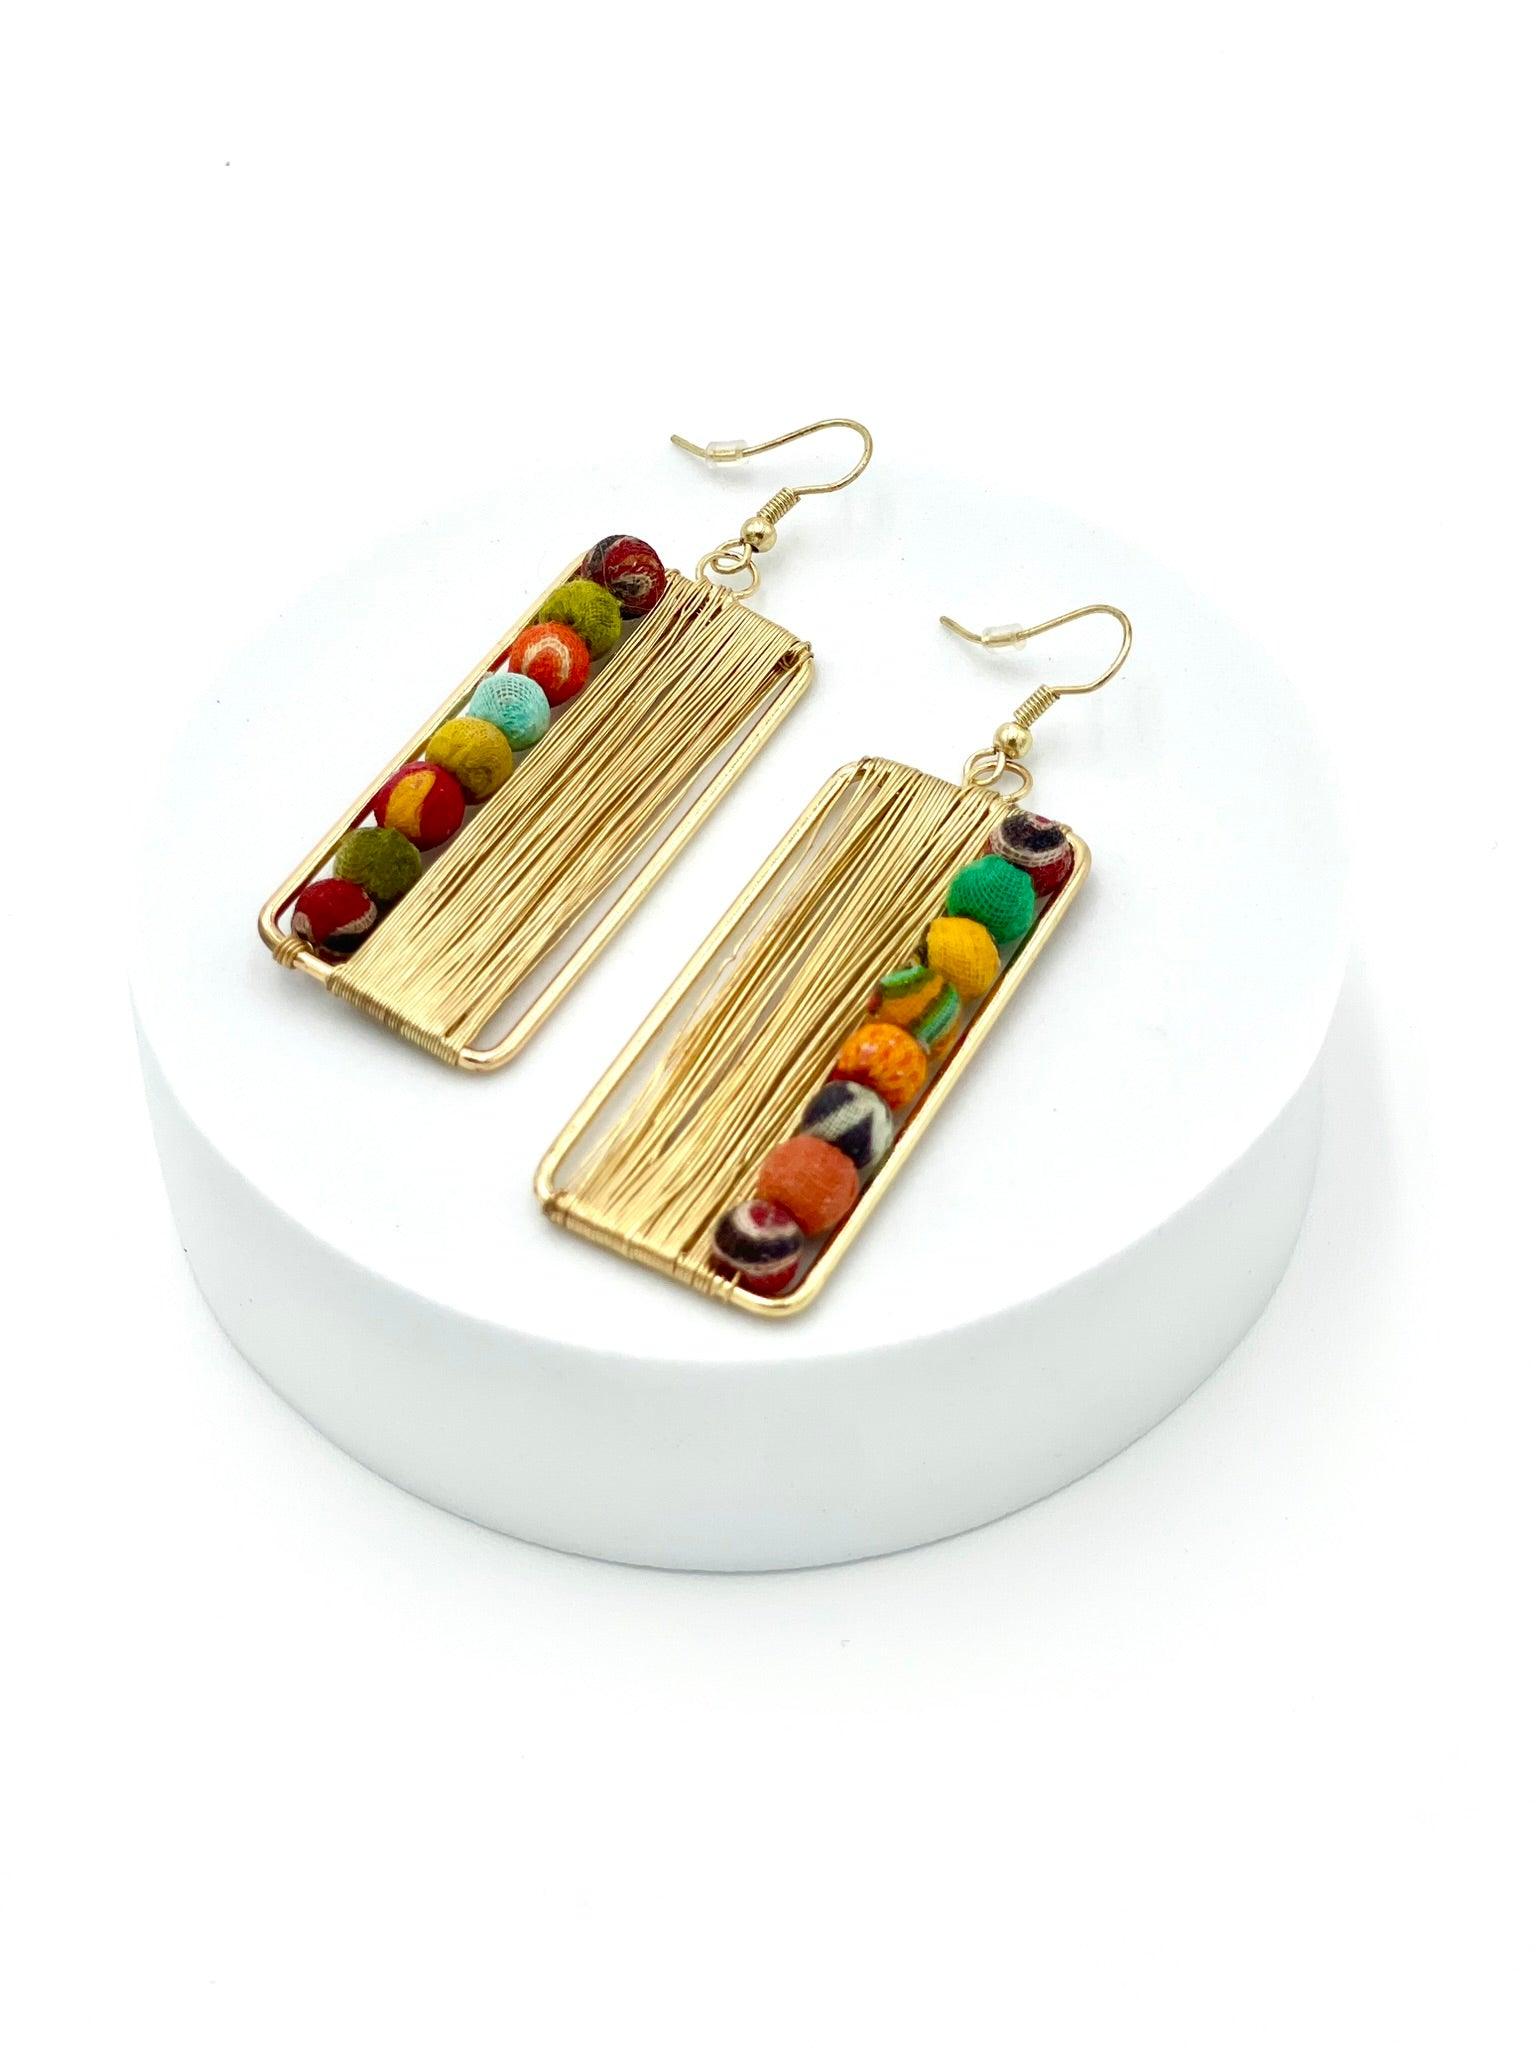 Fair Trade Abacus Earrings with Upcycled Cotton Fabric - Transcend